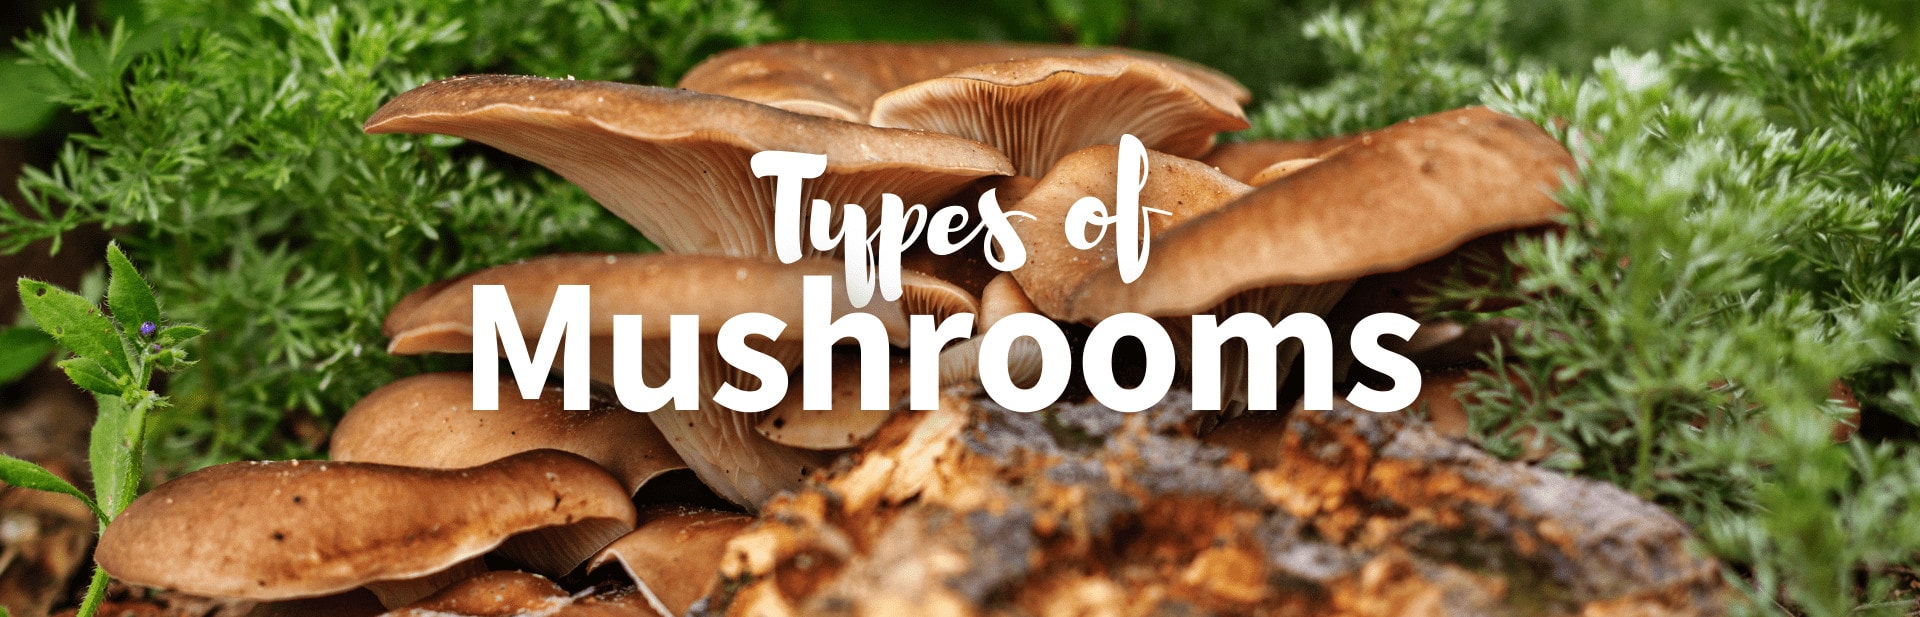 43 Different Types of Mushrooms Species: Edible, Poisonous & Beyond